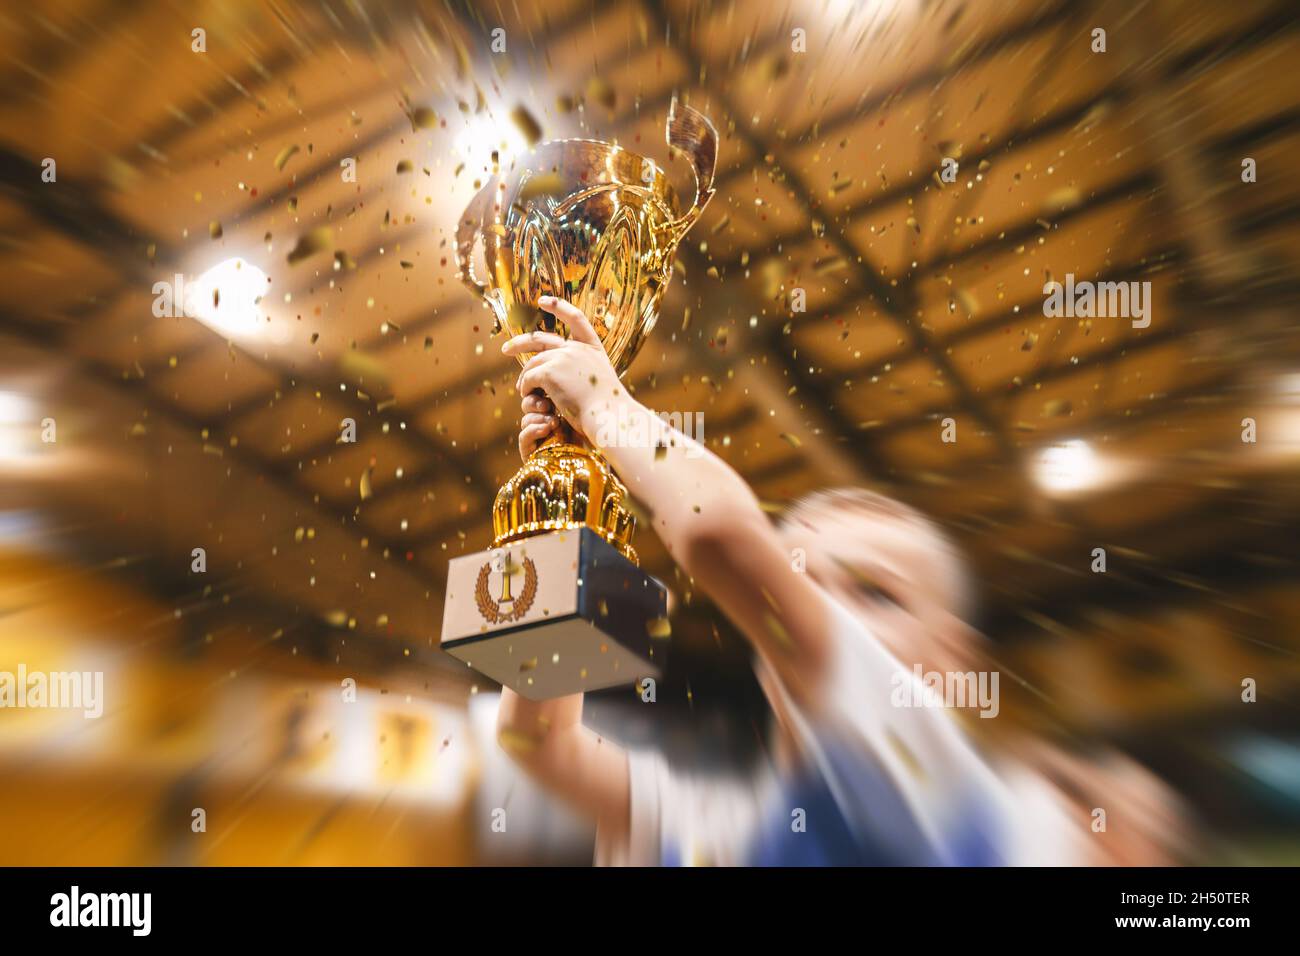 Happy boy rising golden cup, indoor sports celebration championship. Golden confetti falling. Kids in the sports team lift up the golden cup trophy af Stock Photo